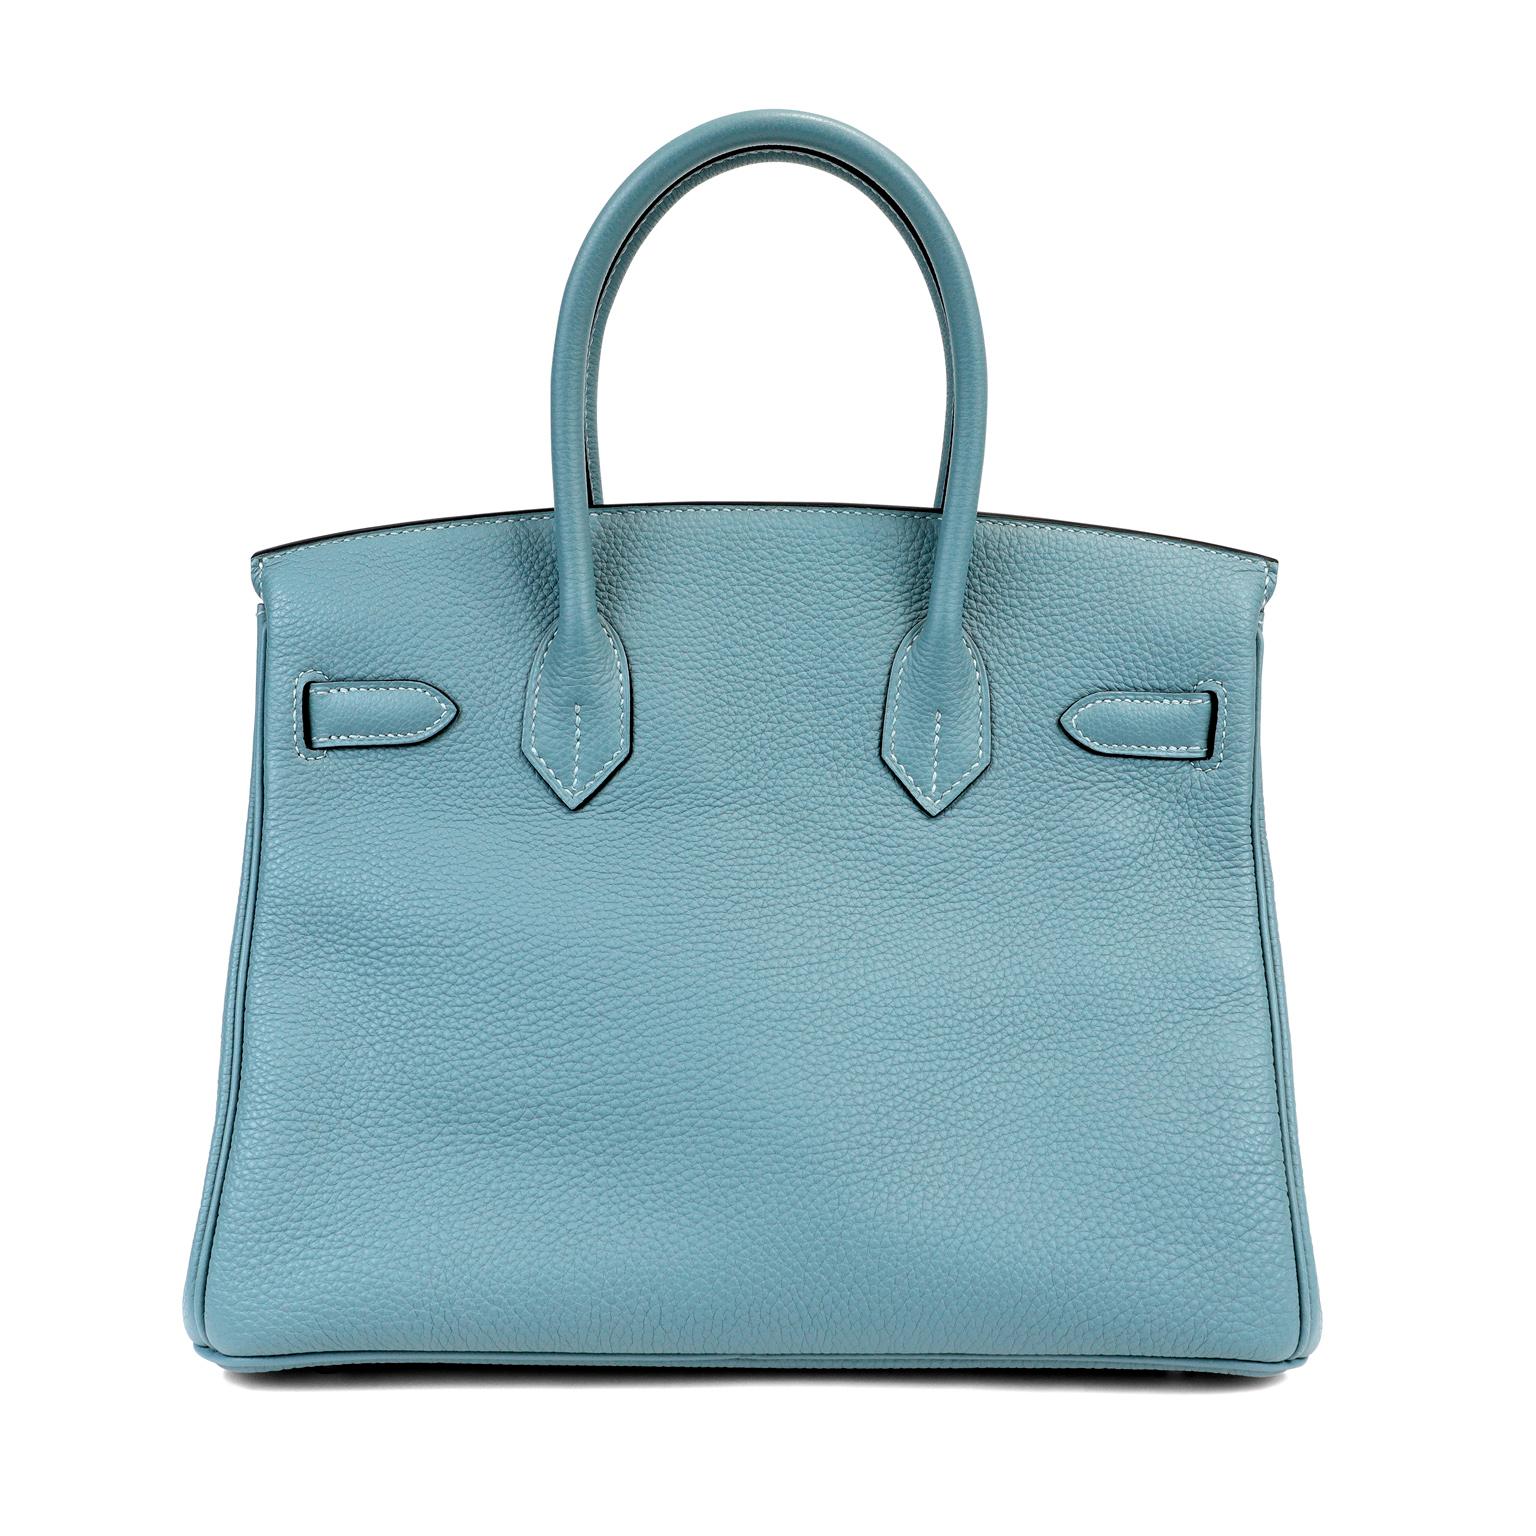 This authentic Hermès Blue Ciel Togo 30 cm Birkin is in excellent condition.    Hand stitched by skilled craftsmen, wait lists of a year or more are common for the Hermès Birkin. They are considered the ultimate in luxury fashion. Bleu Ciel, a pale